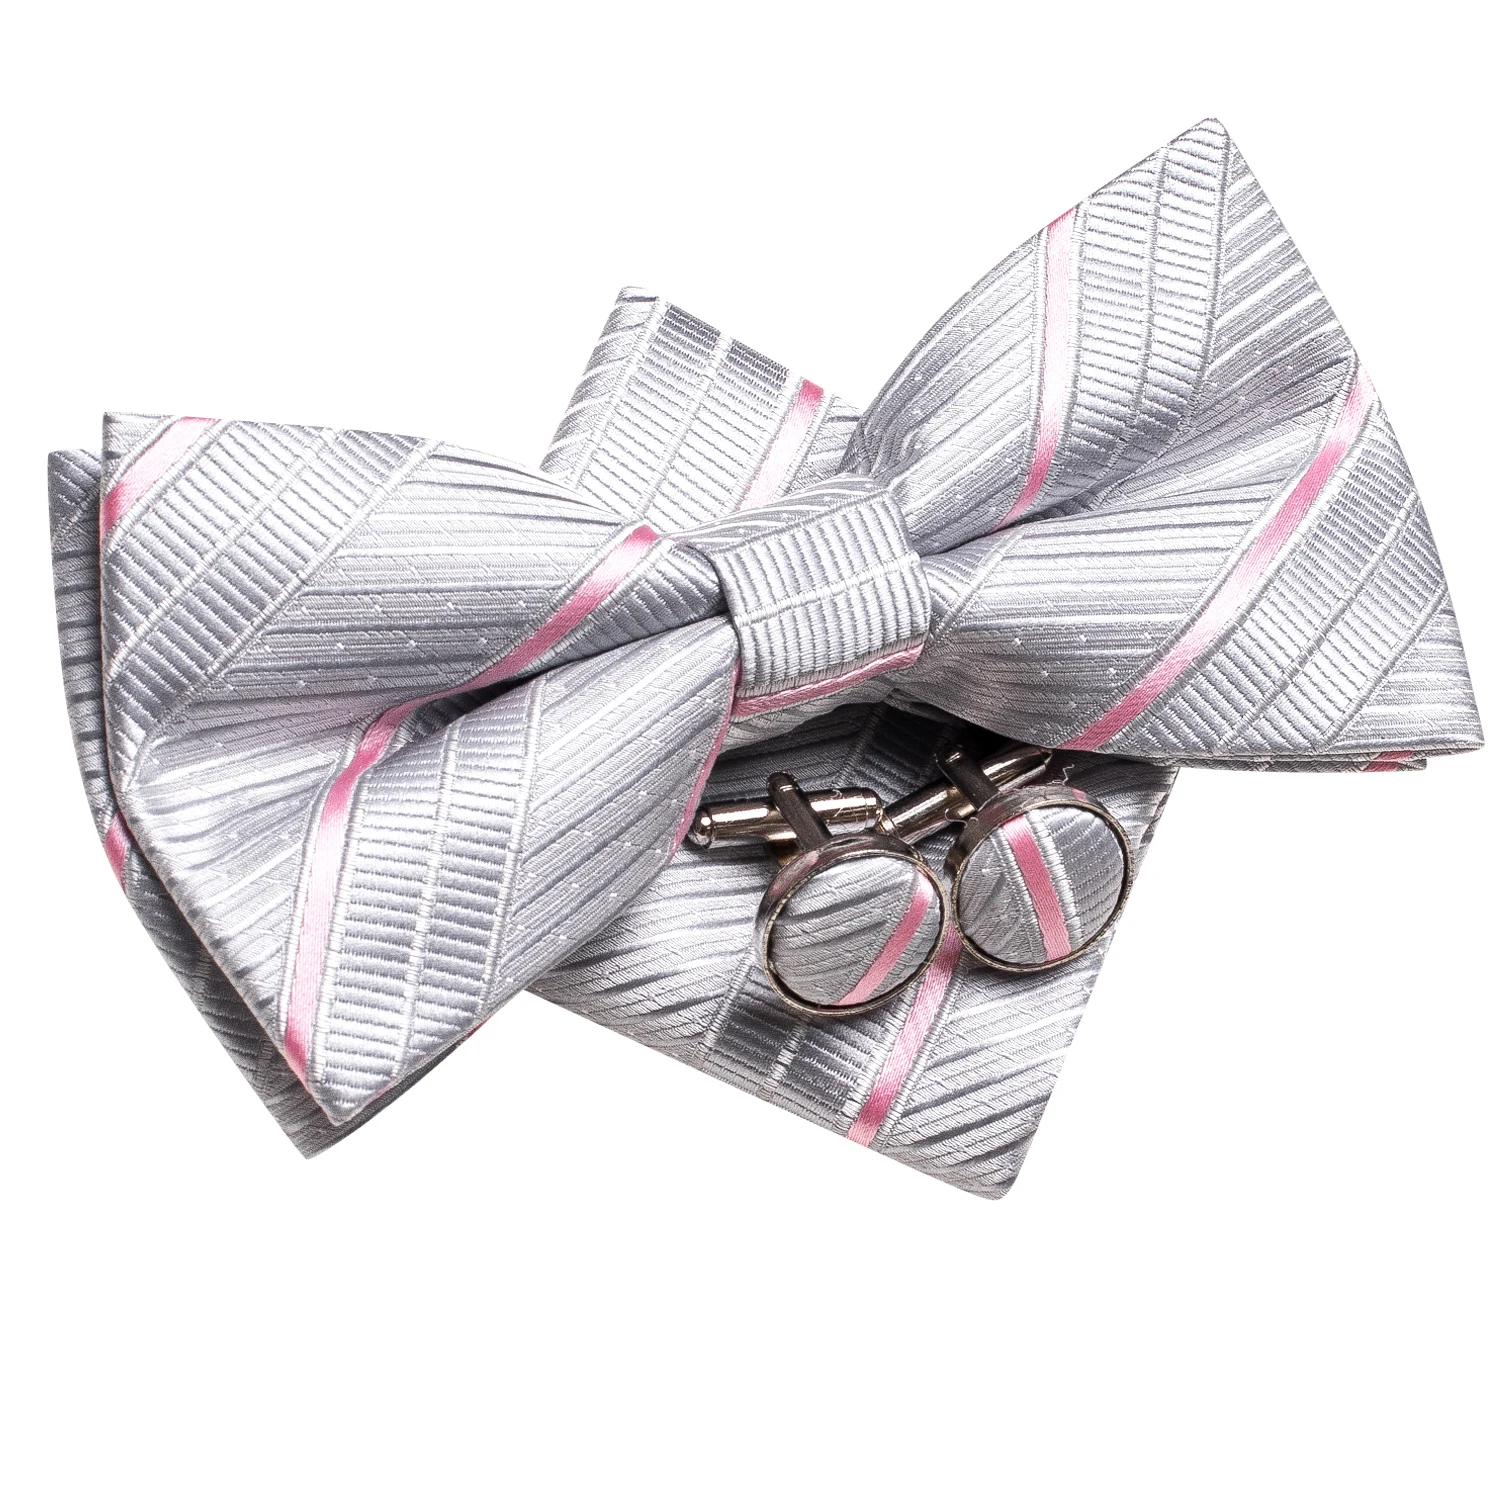 

Hi-tie Silver Silk Mens Bow Tie Hanky Cuff links Set Pre-tied Butterfly Knot Jacquard Striped Bowtie for Male Wedding Business